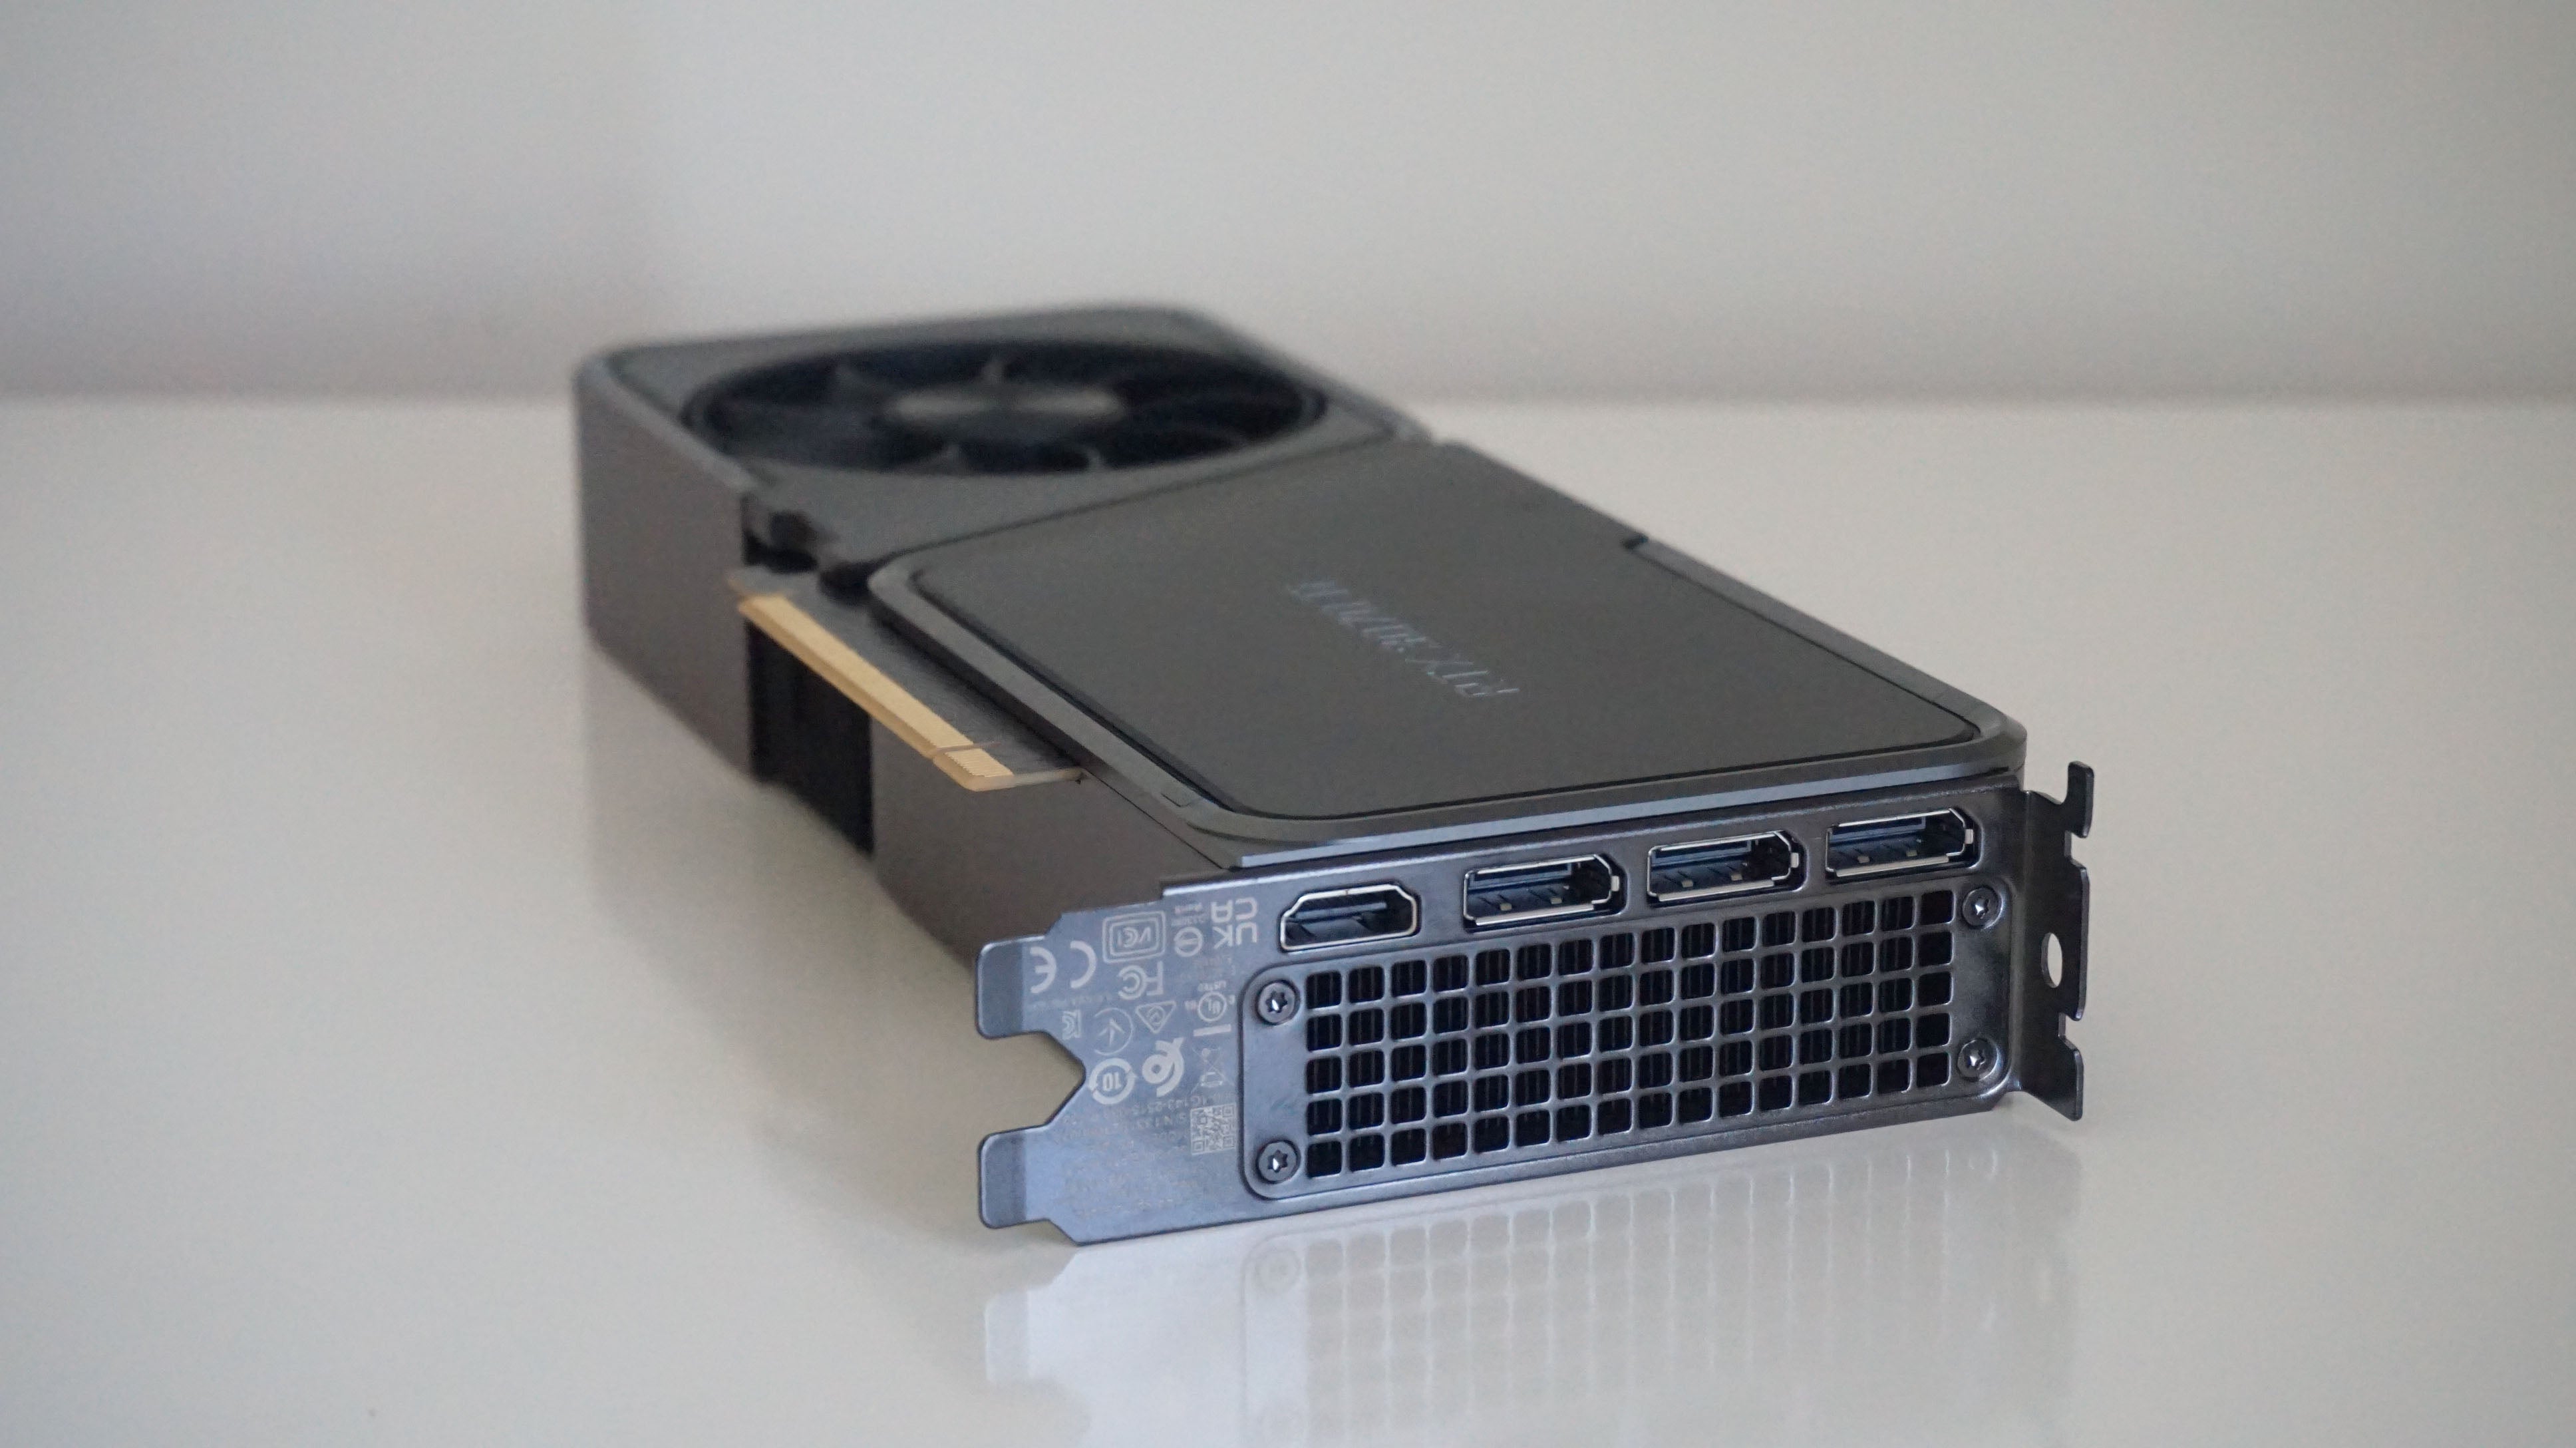 A photo of Nvidia's GeForce RTX 3070 Ti Founders Edition graphics card's display outputs